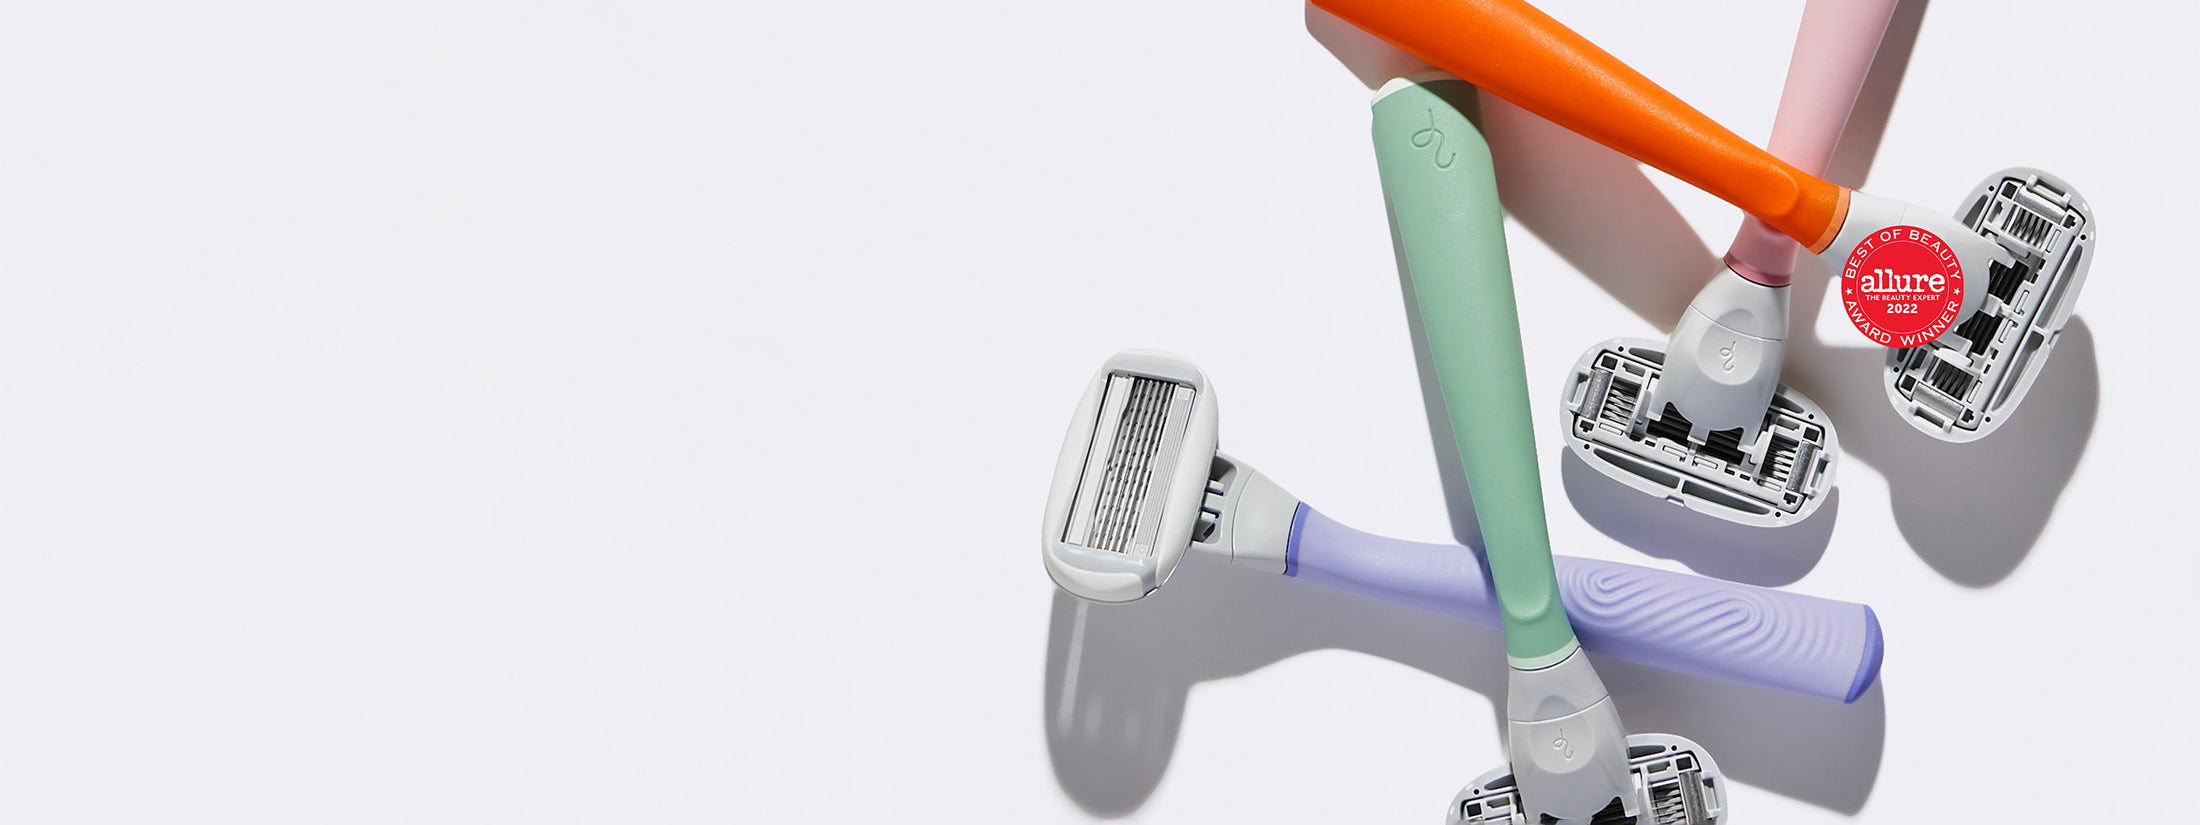 Lilac, Sage, Papaya, and Rose Flamingo Razors scattered together on a white background